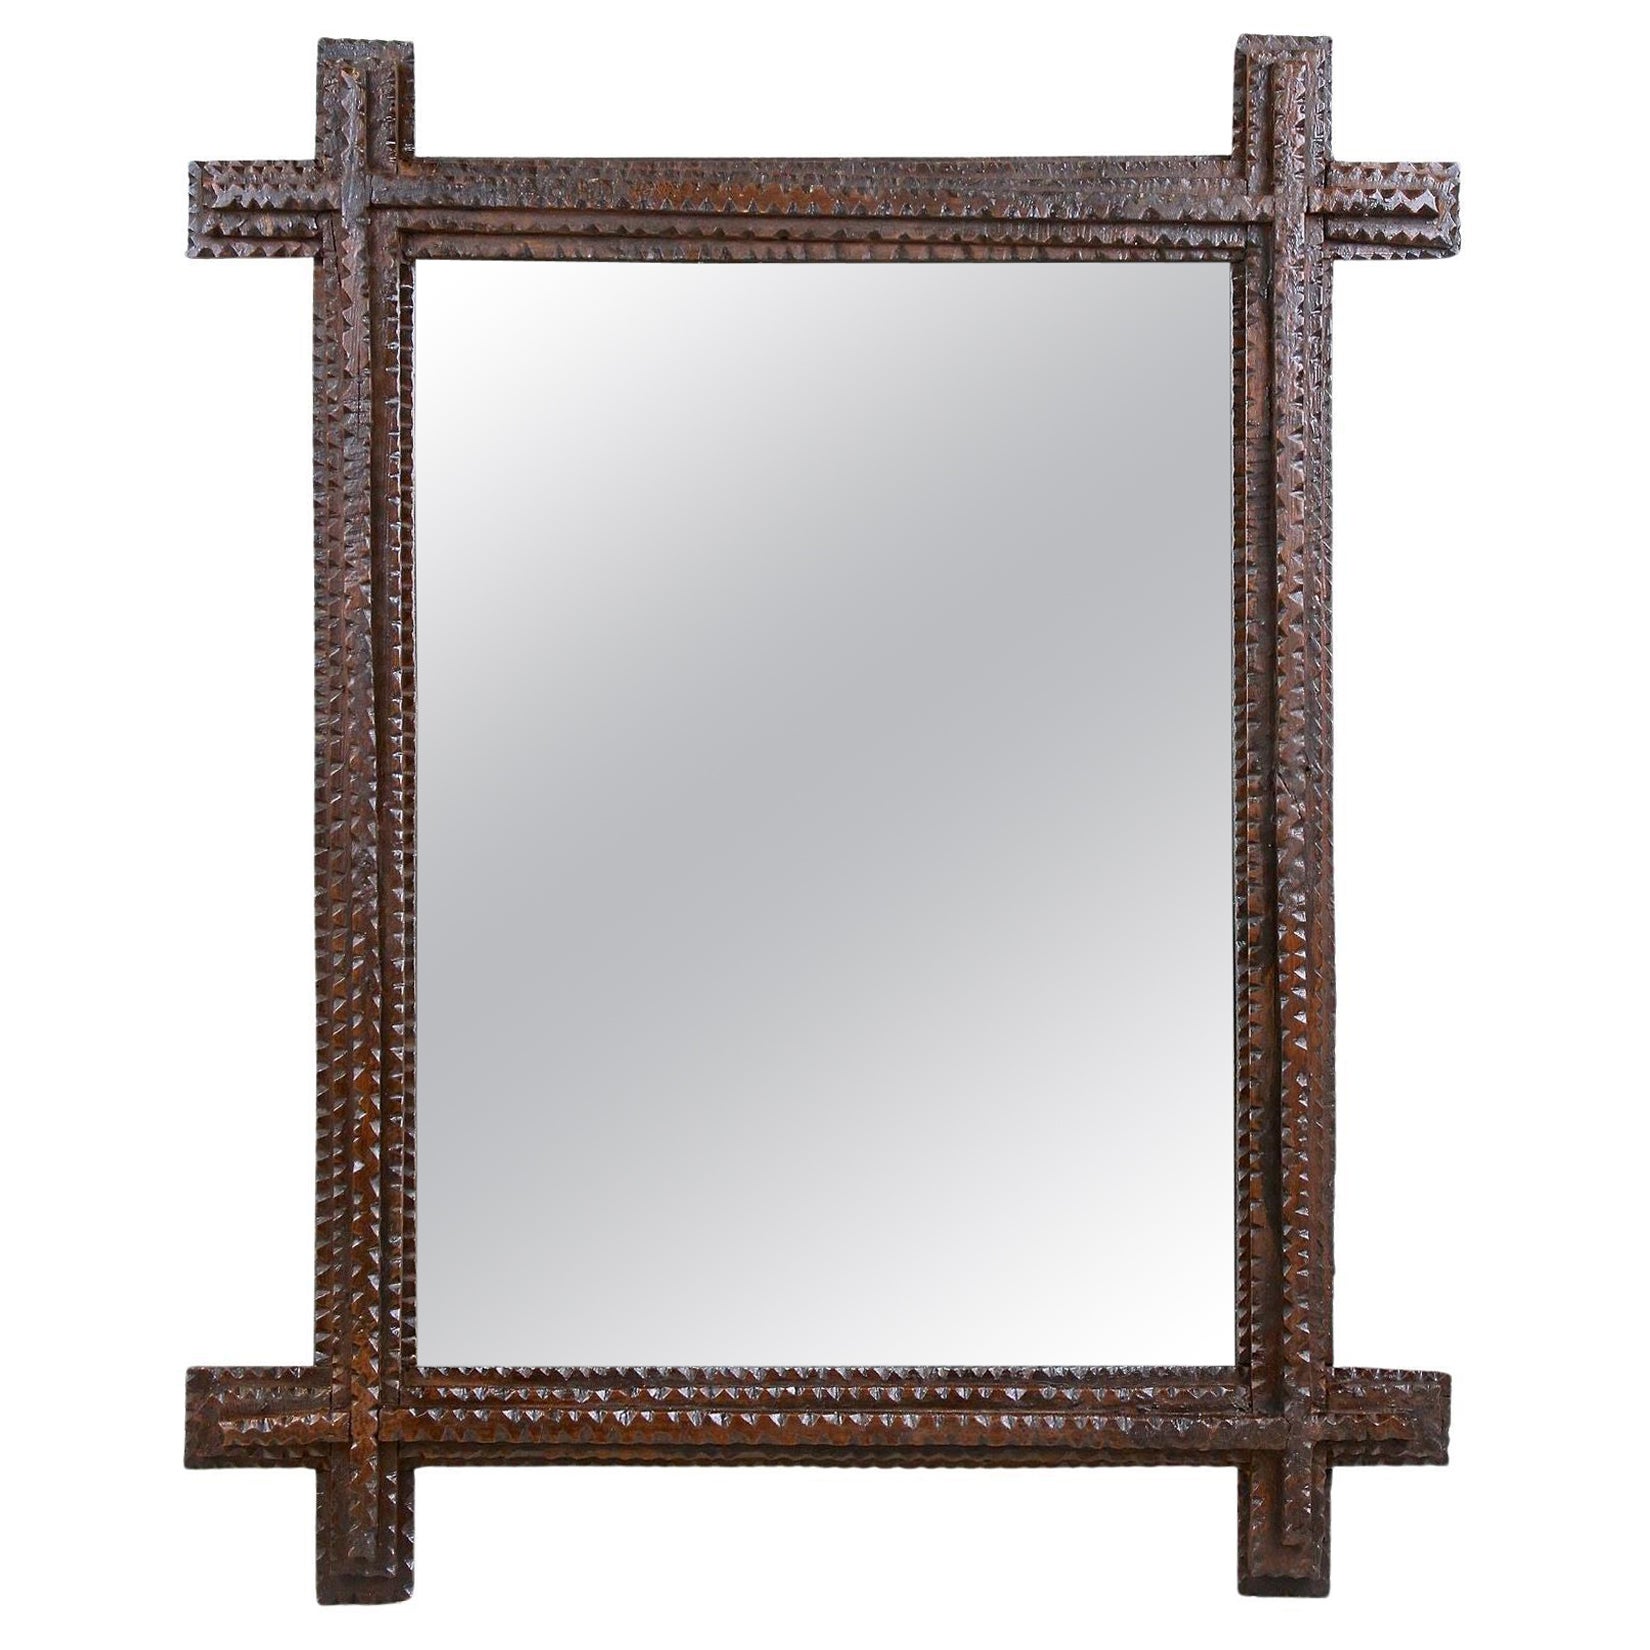 Tramp Art Rustic Wall Mirror, Basswood Handcarved, Austria, circa 1860 For Sale